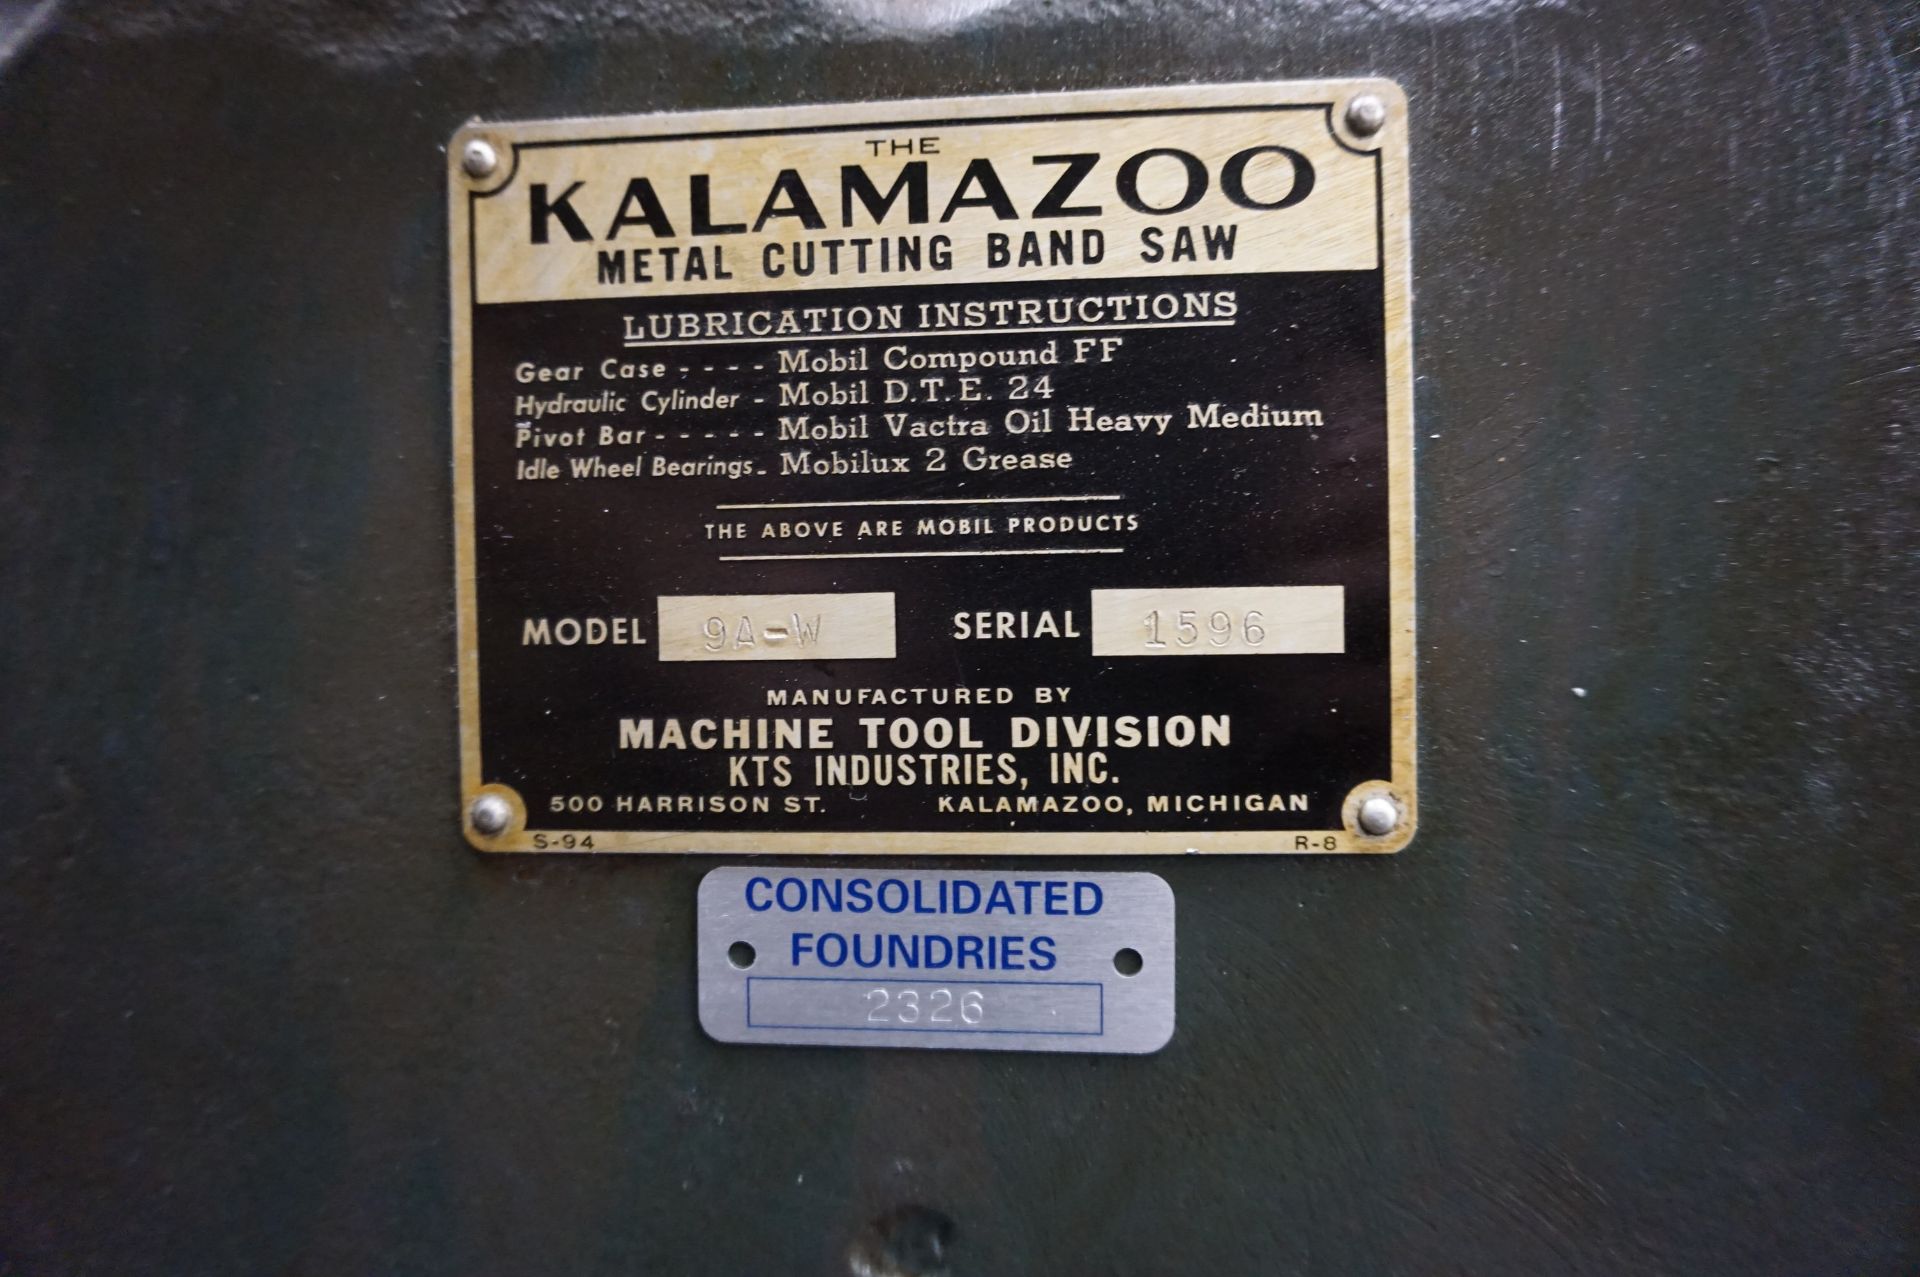 KALAMAZOO MODEL 9A-W METAL CUTTING BAND SAW, S/N 1596 **Rigging provided exclusively by Golden - Image 3 of 3